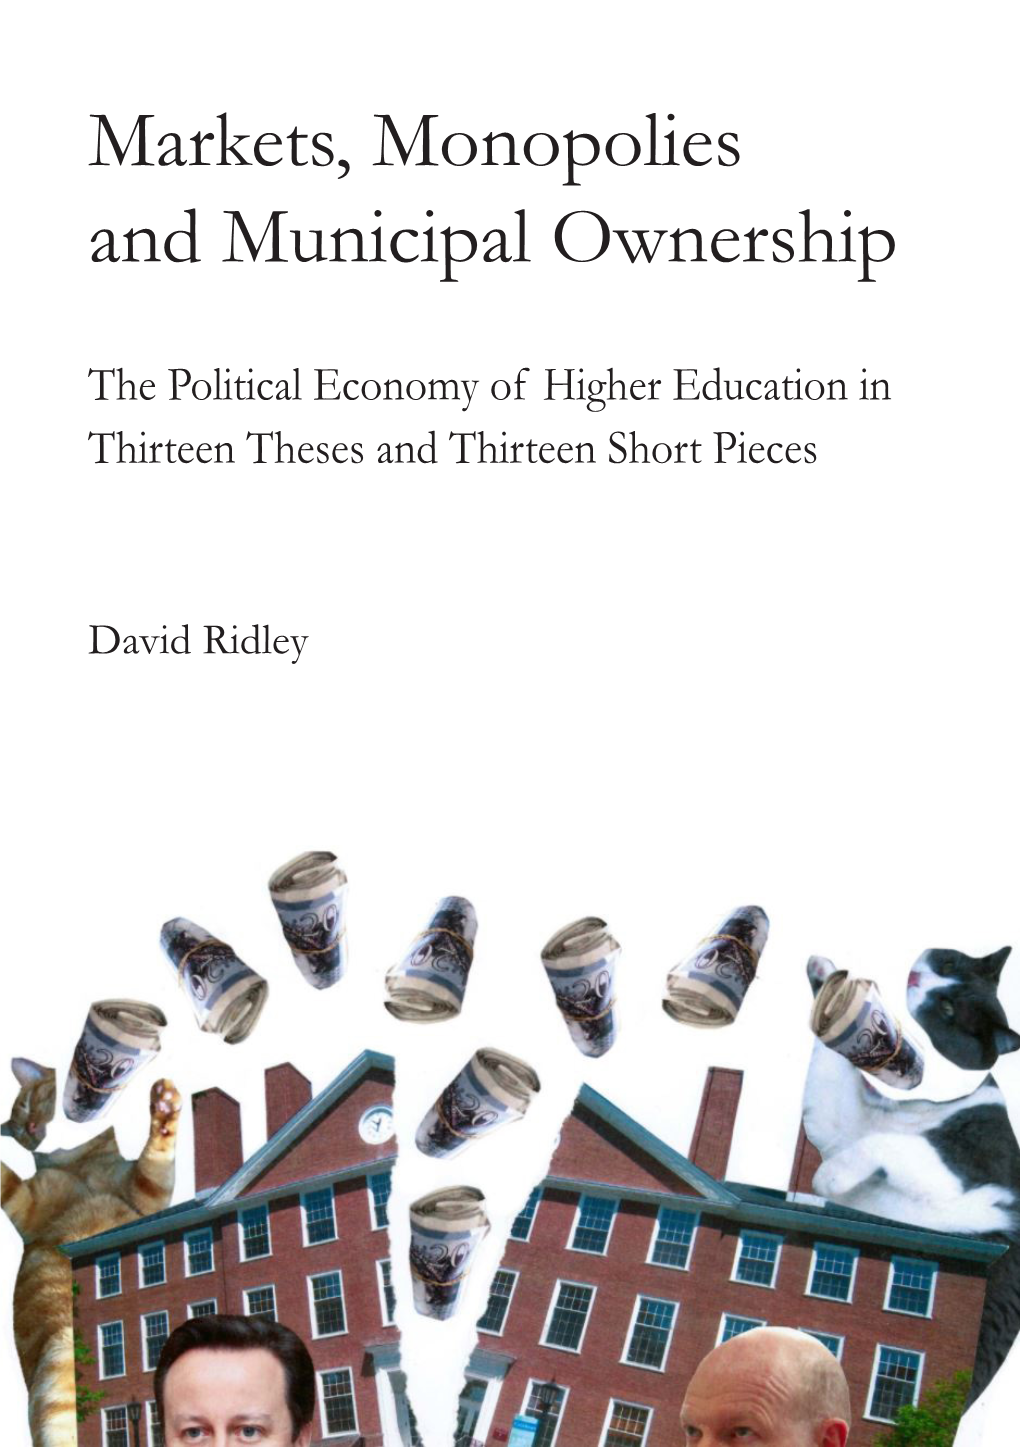 Markets, Monopolies and Municipal Ownership